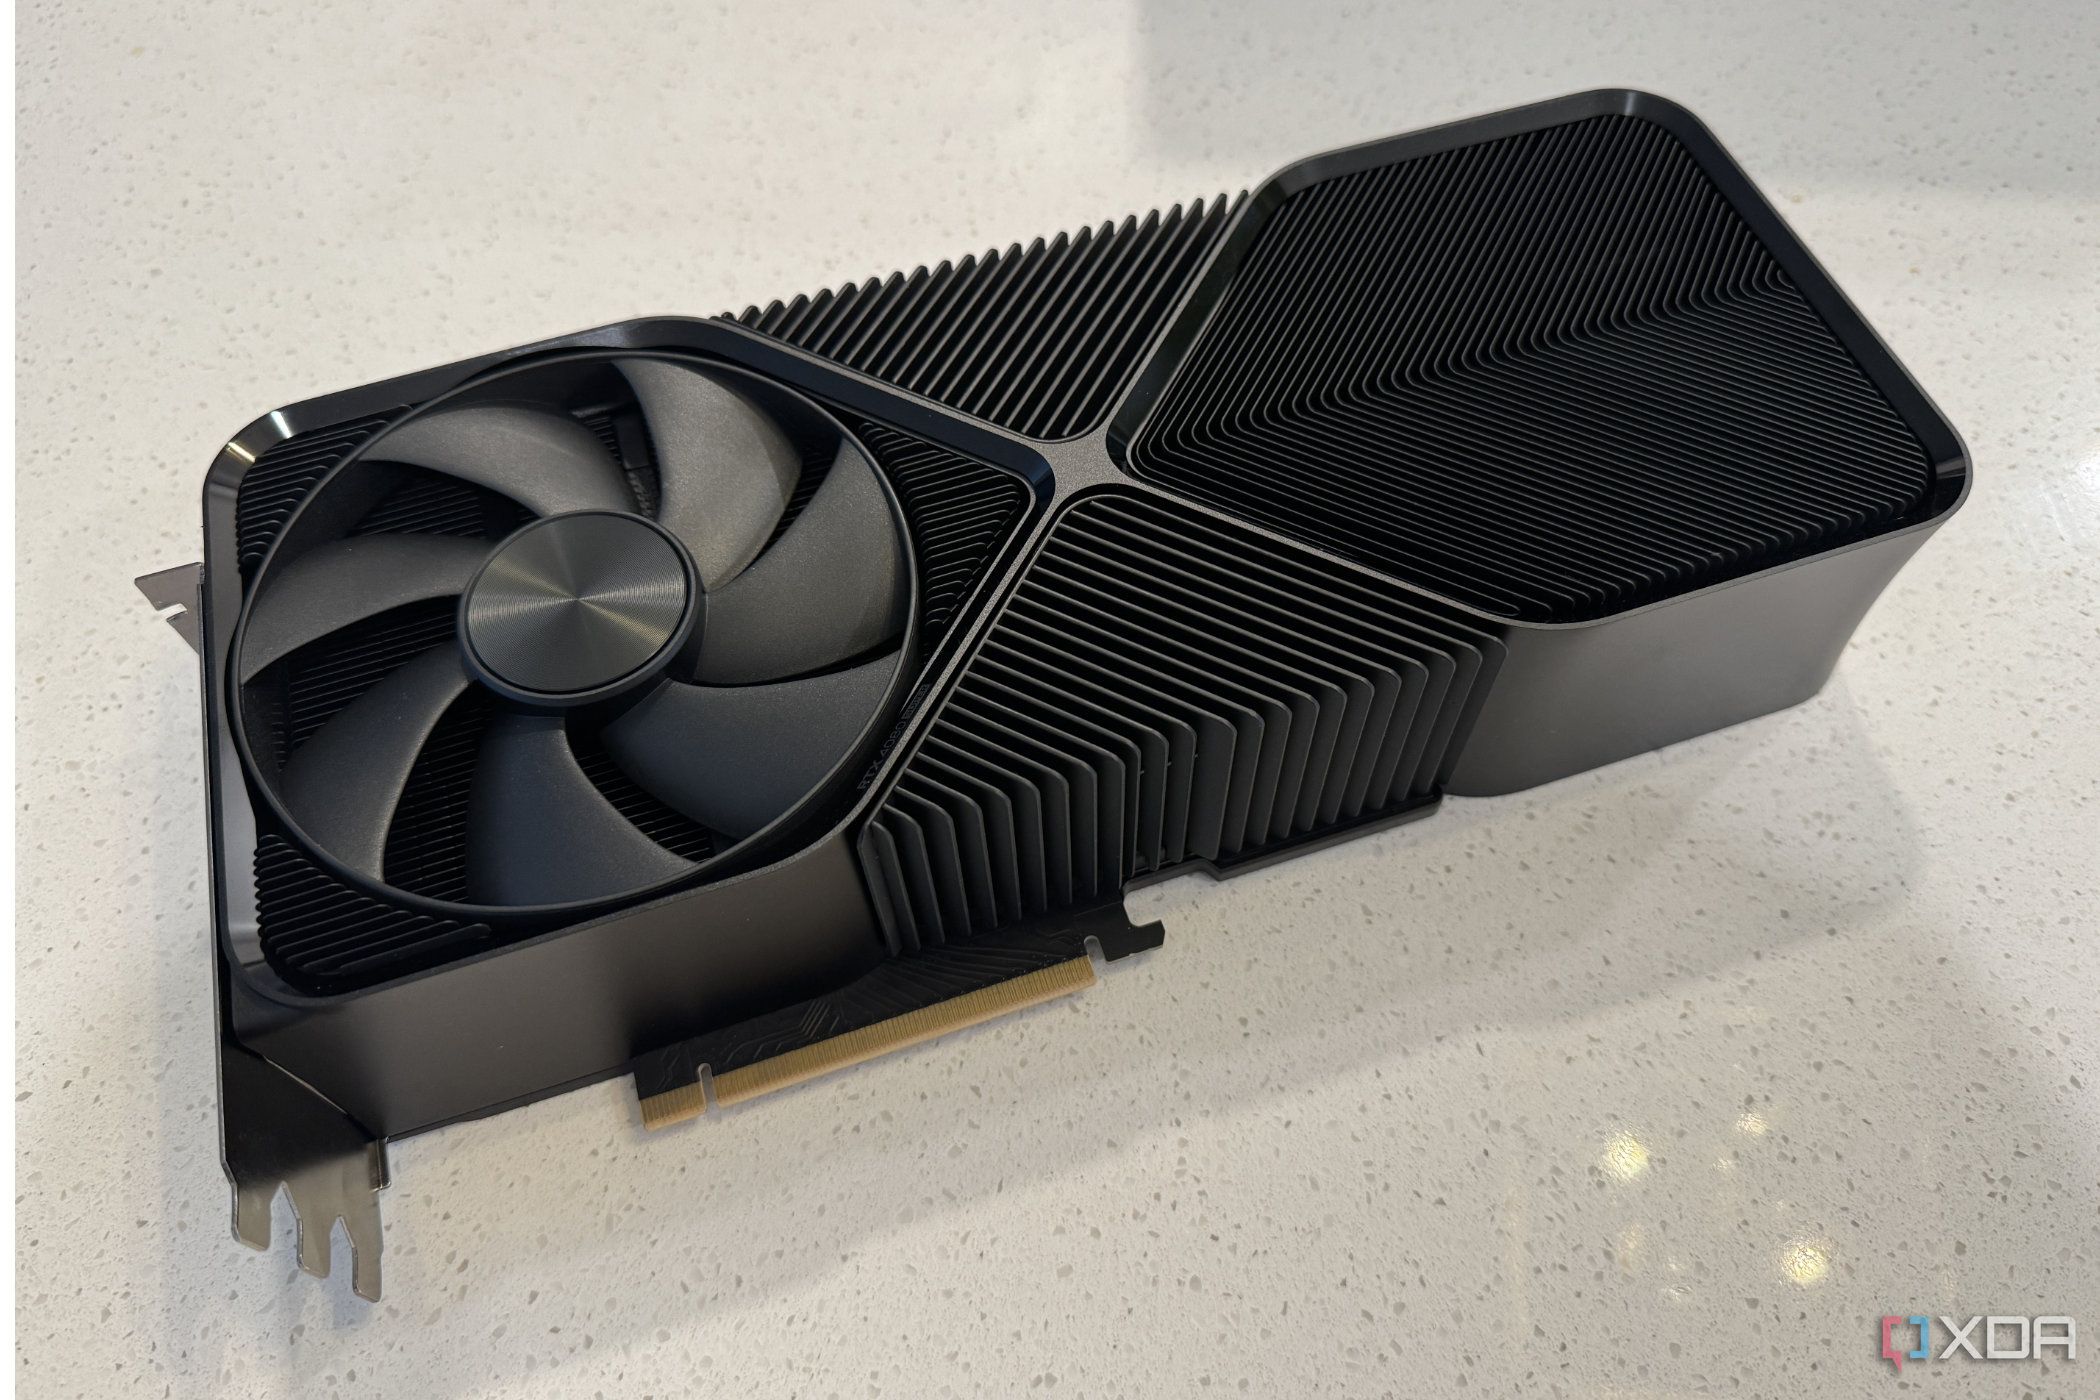 How do graphics cards work under the hood to bring your games to life?